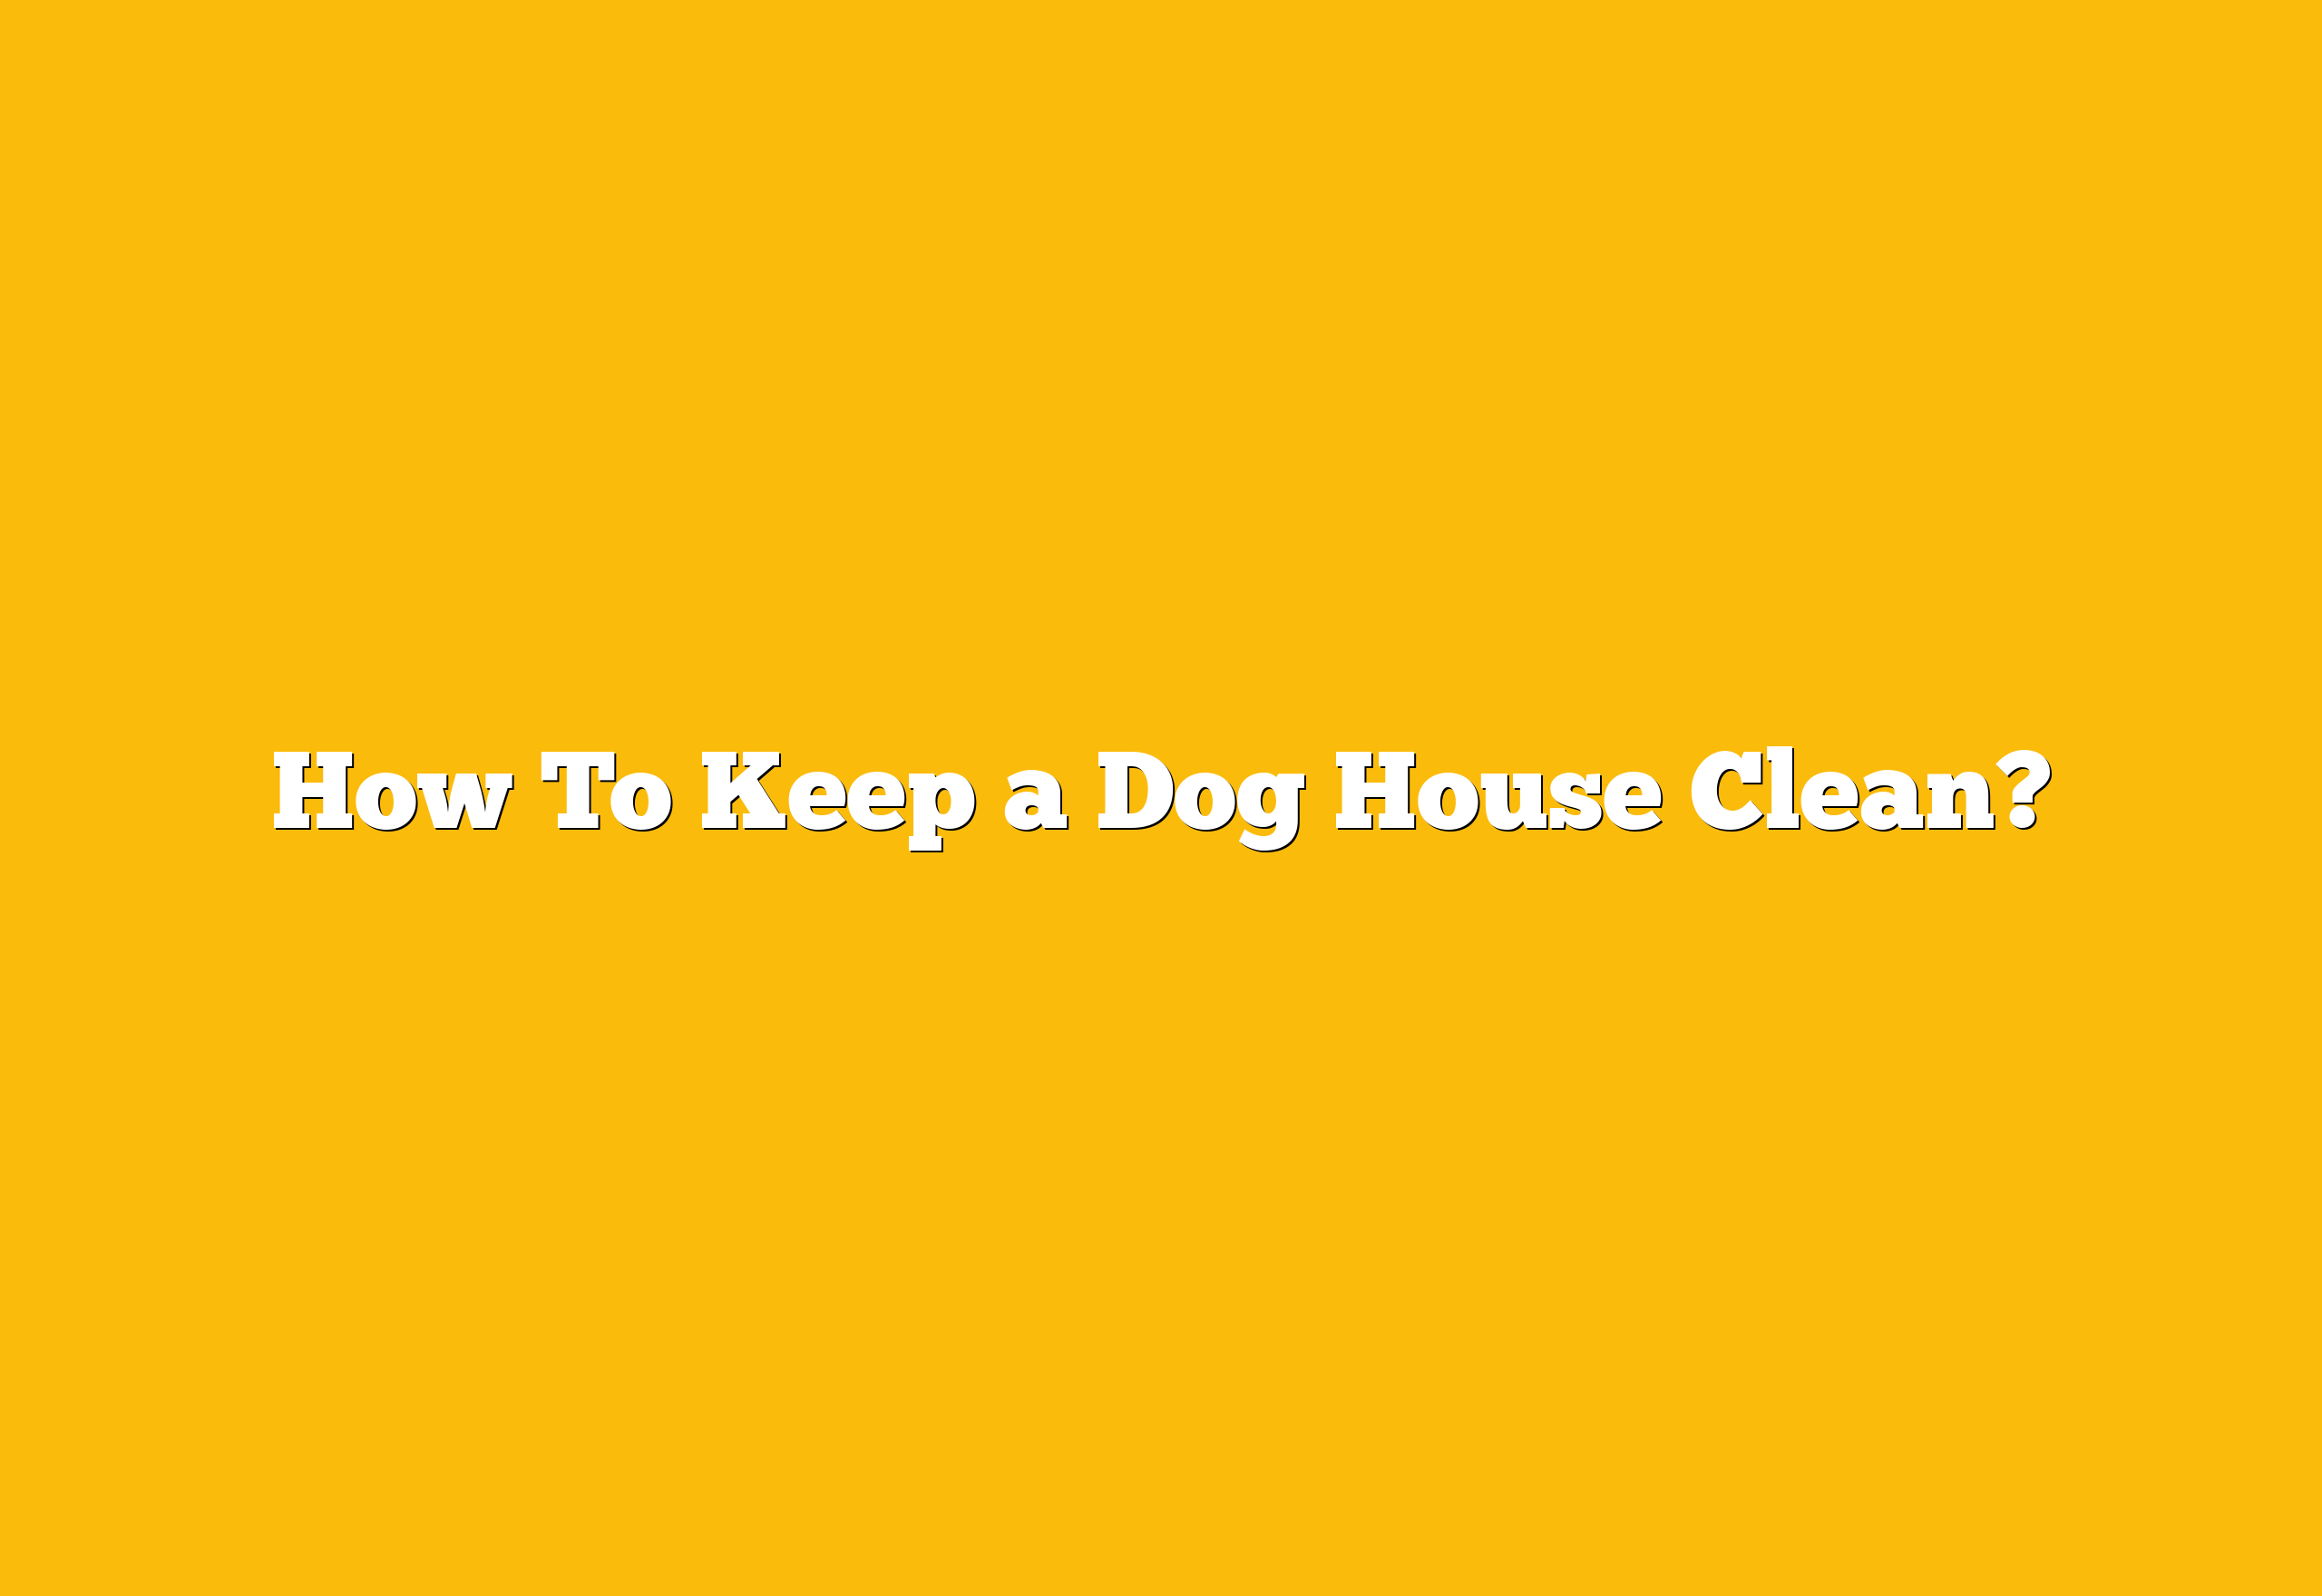 How To Keep a Dog House Clean?